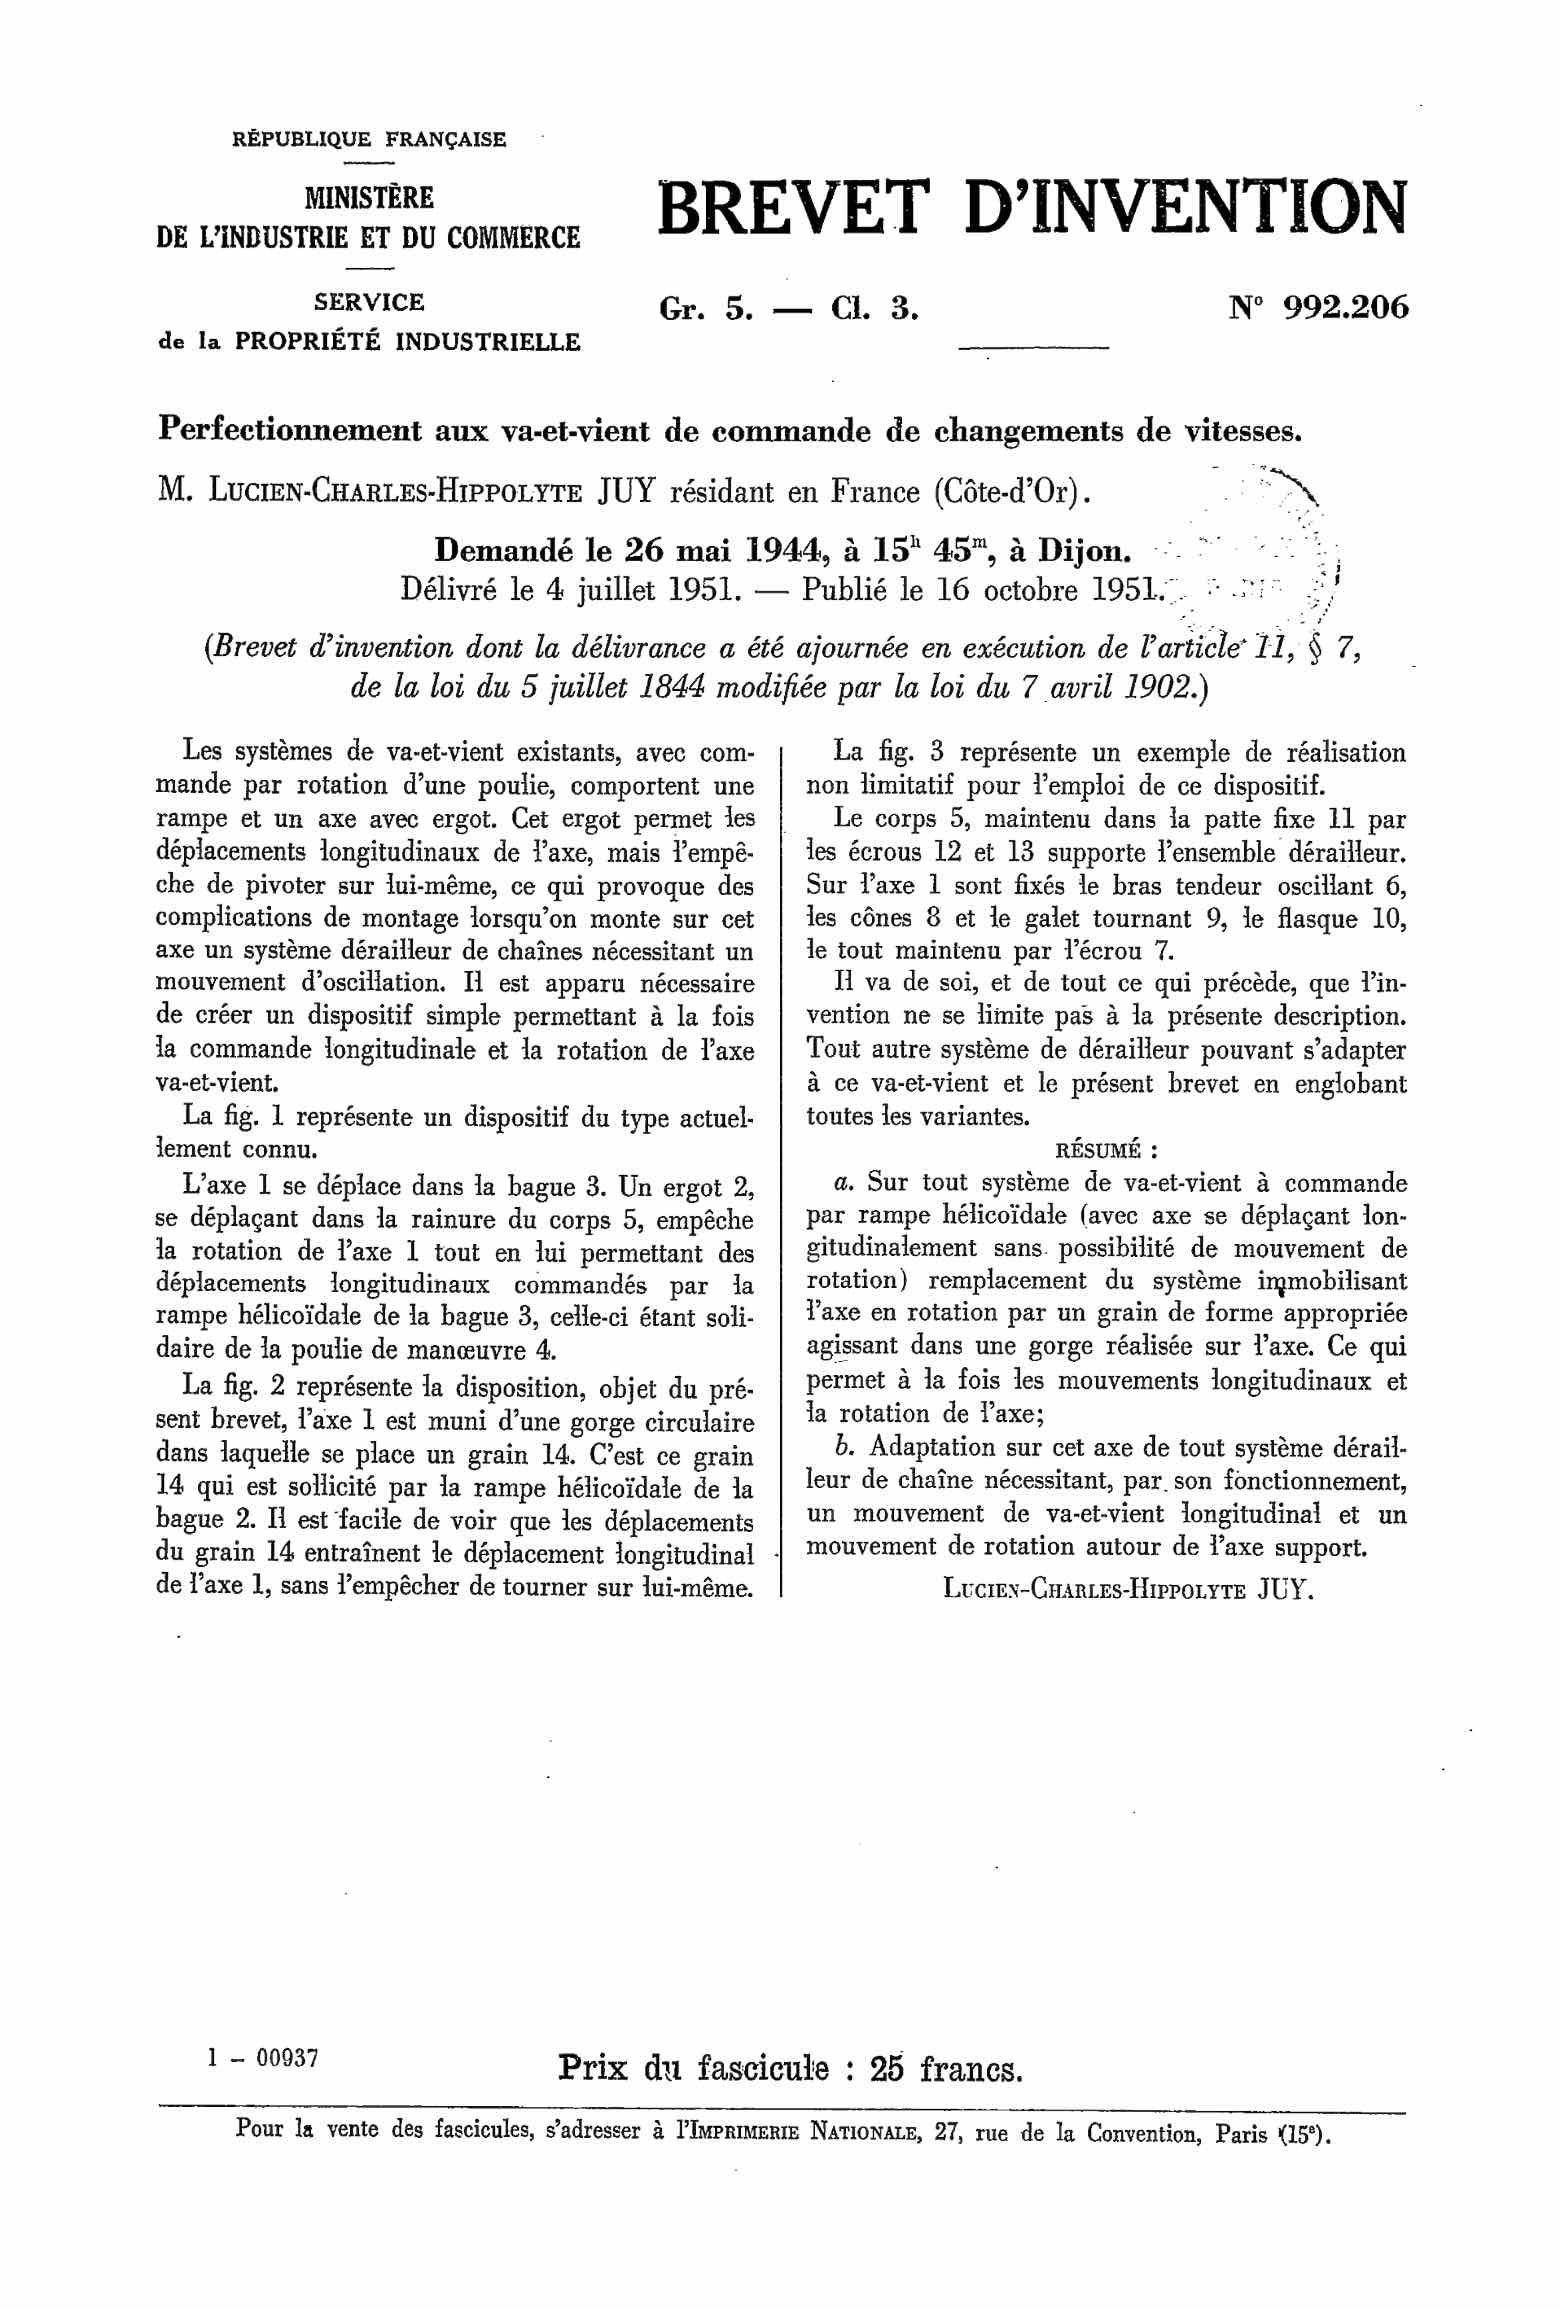 French Patent 992,206 scan 1 - Simplex main image